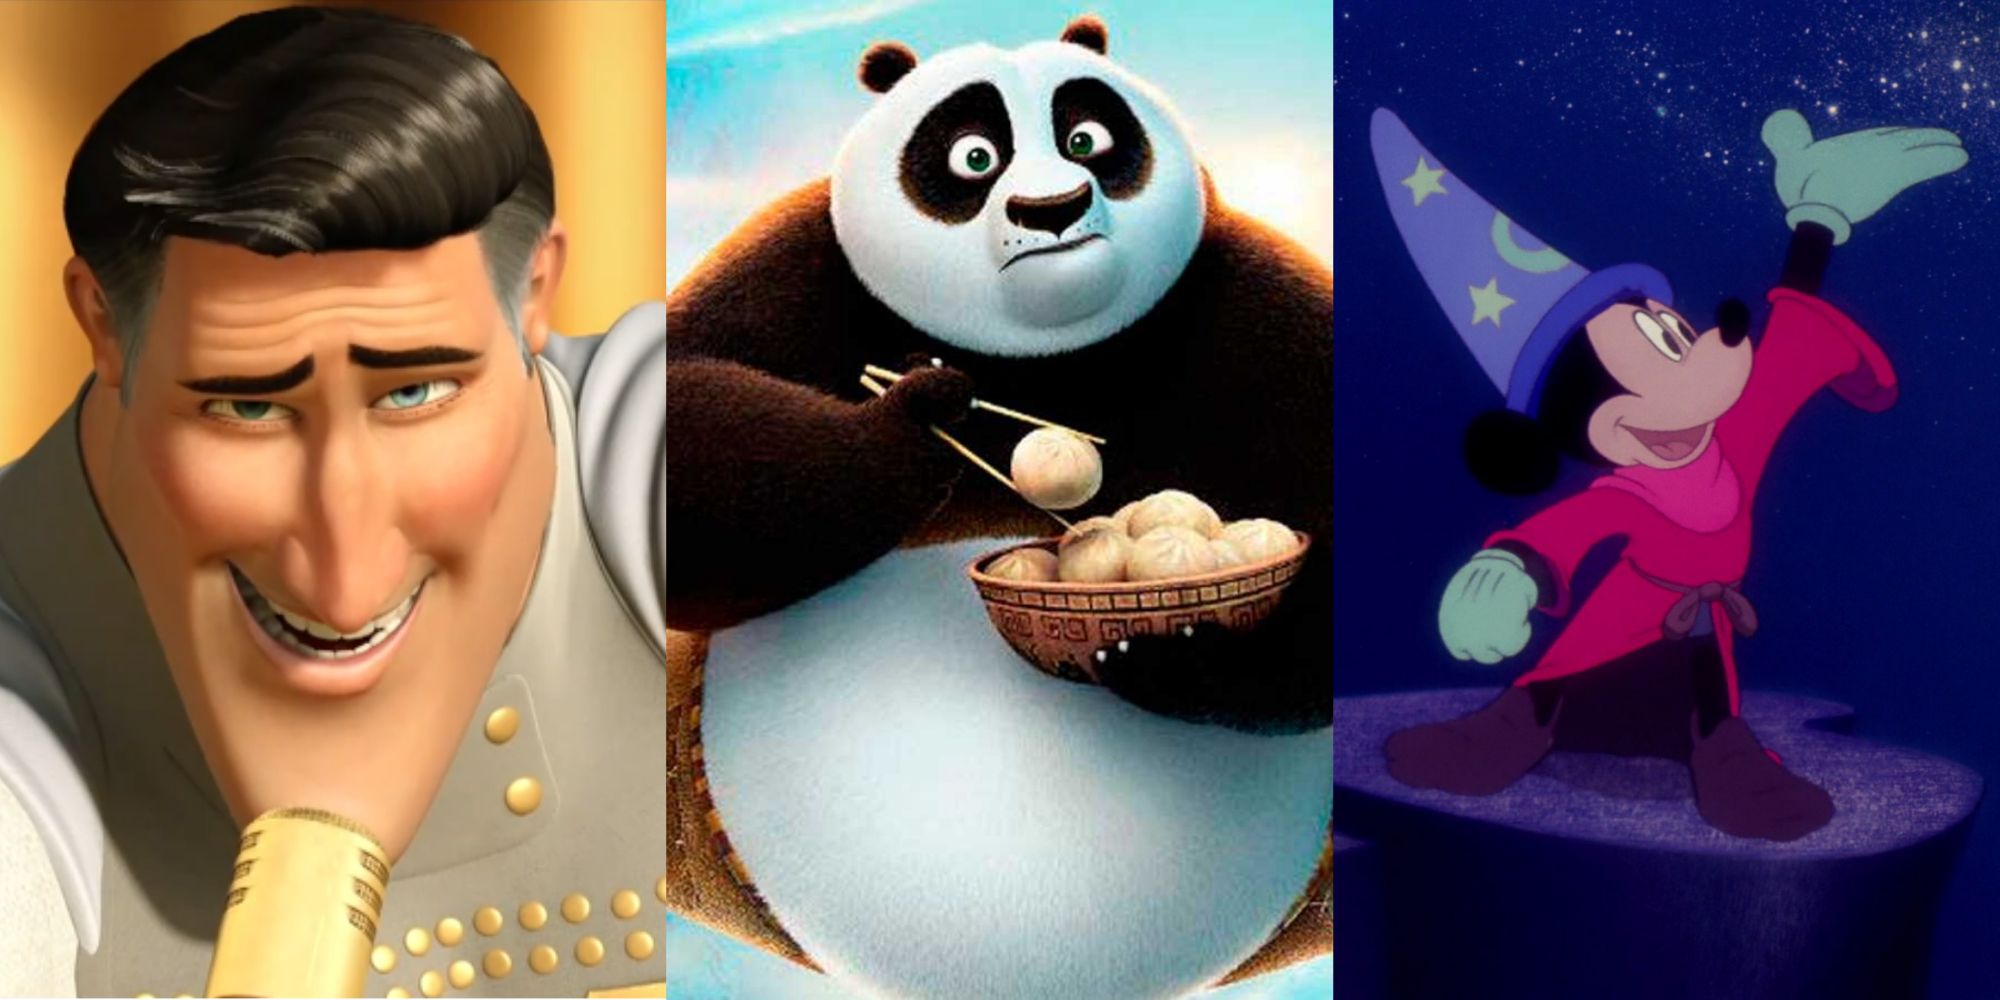 The 10 Most Powerful Animated Movie Characters, from 'Kung Fu Panda' to  'Megamind'